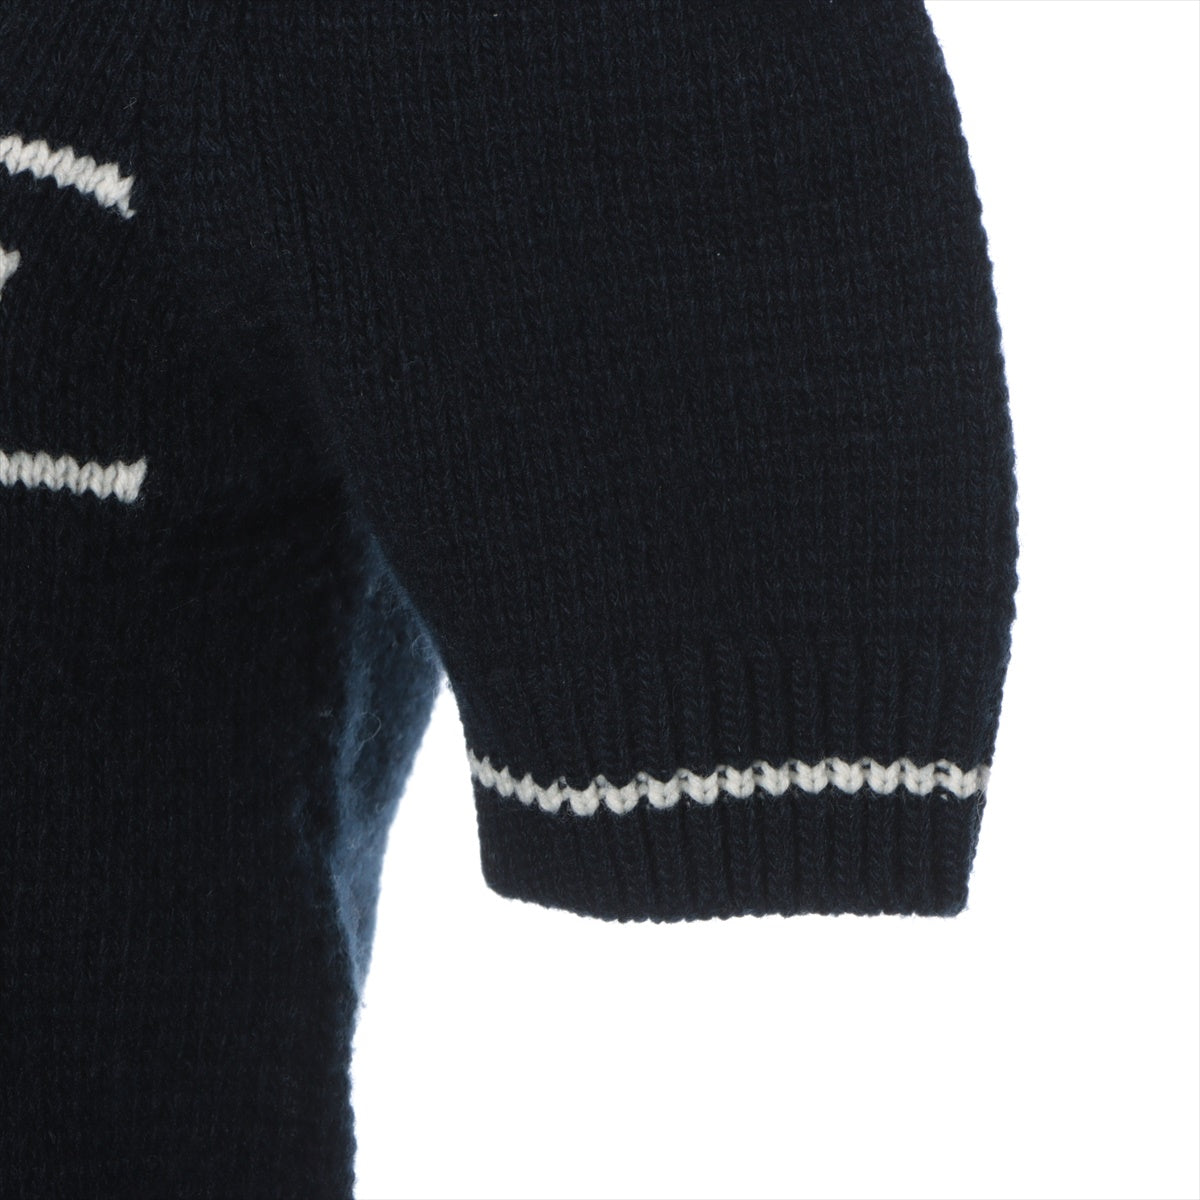 Christian Dior Wool & Cashmere Short Sleeve Knitwear I38 Ladies' Navy blue  224S09AM308